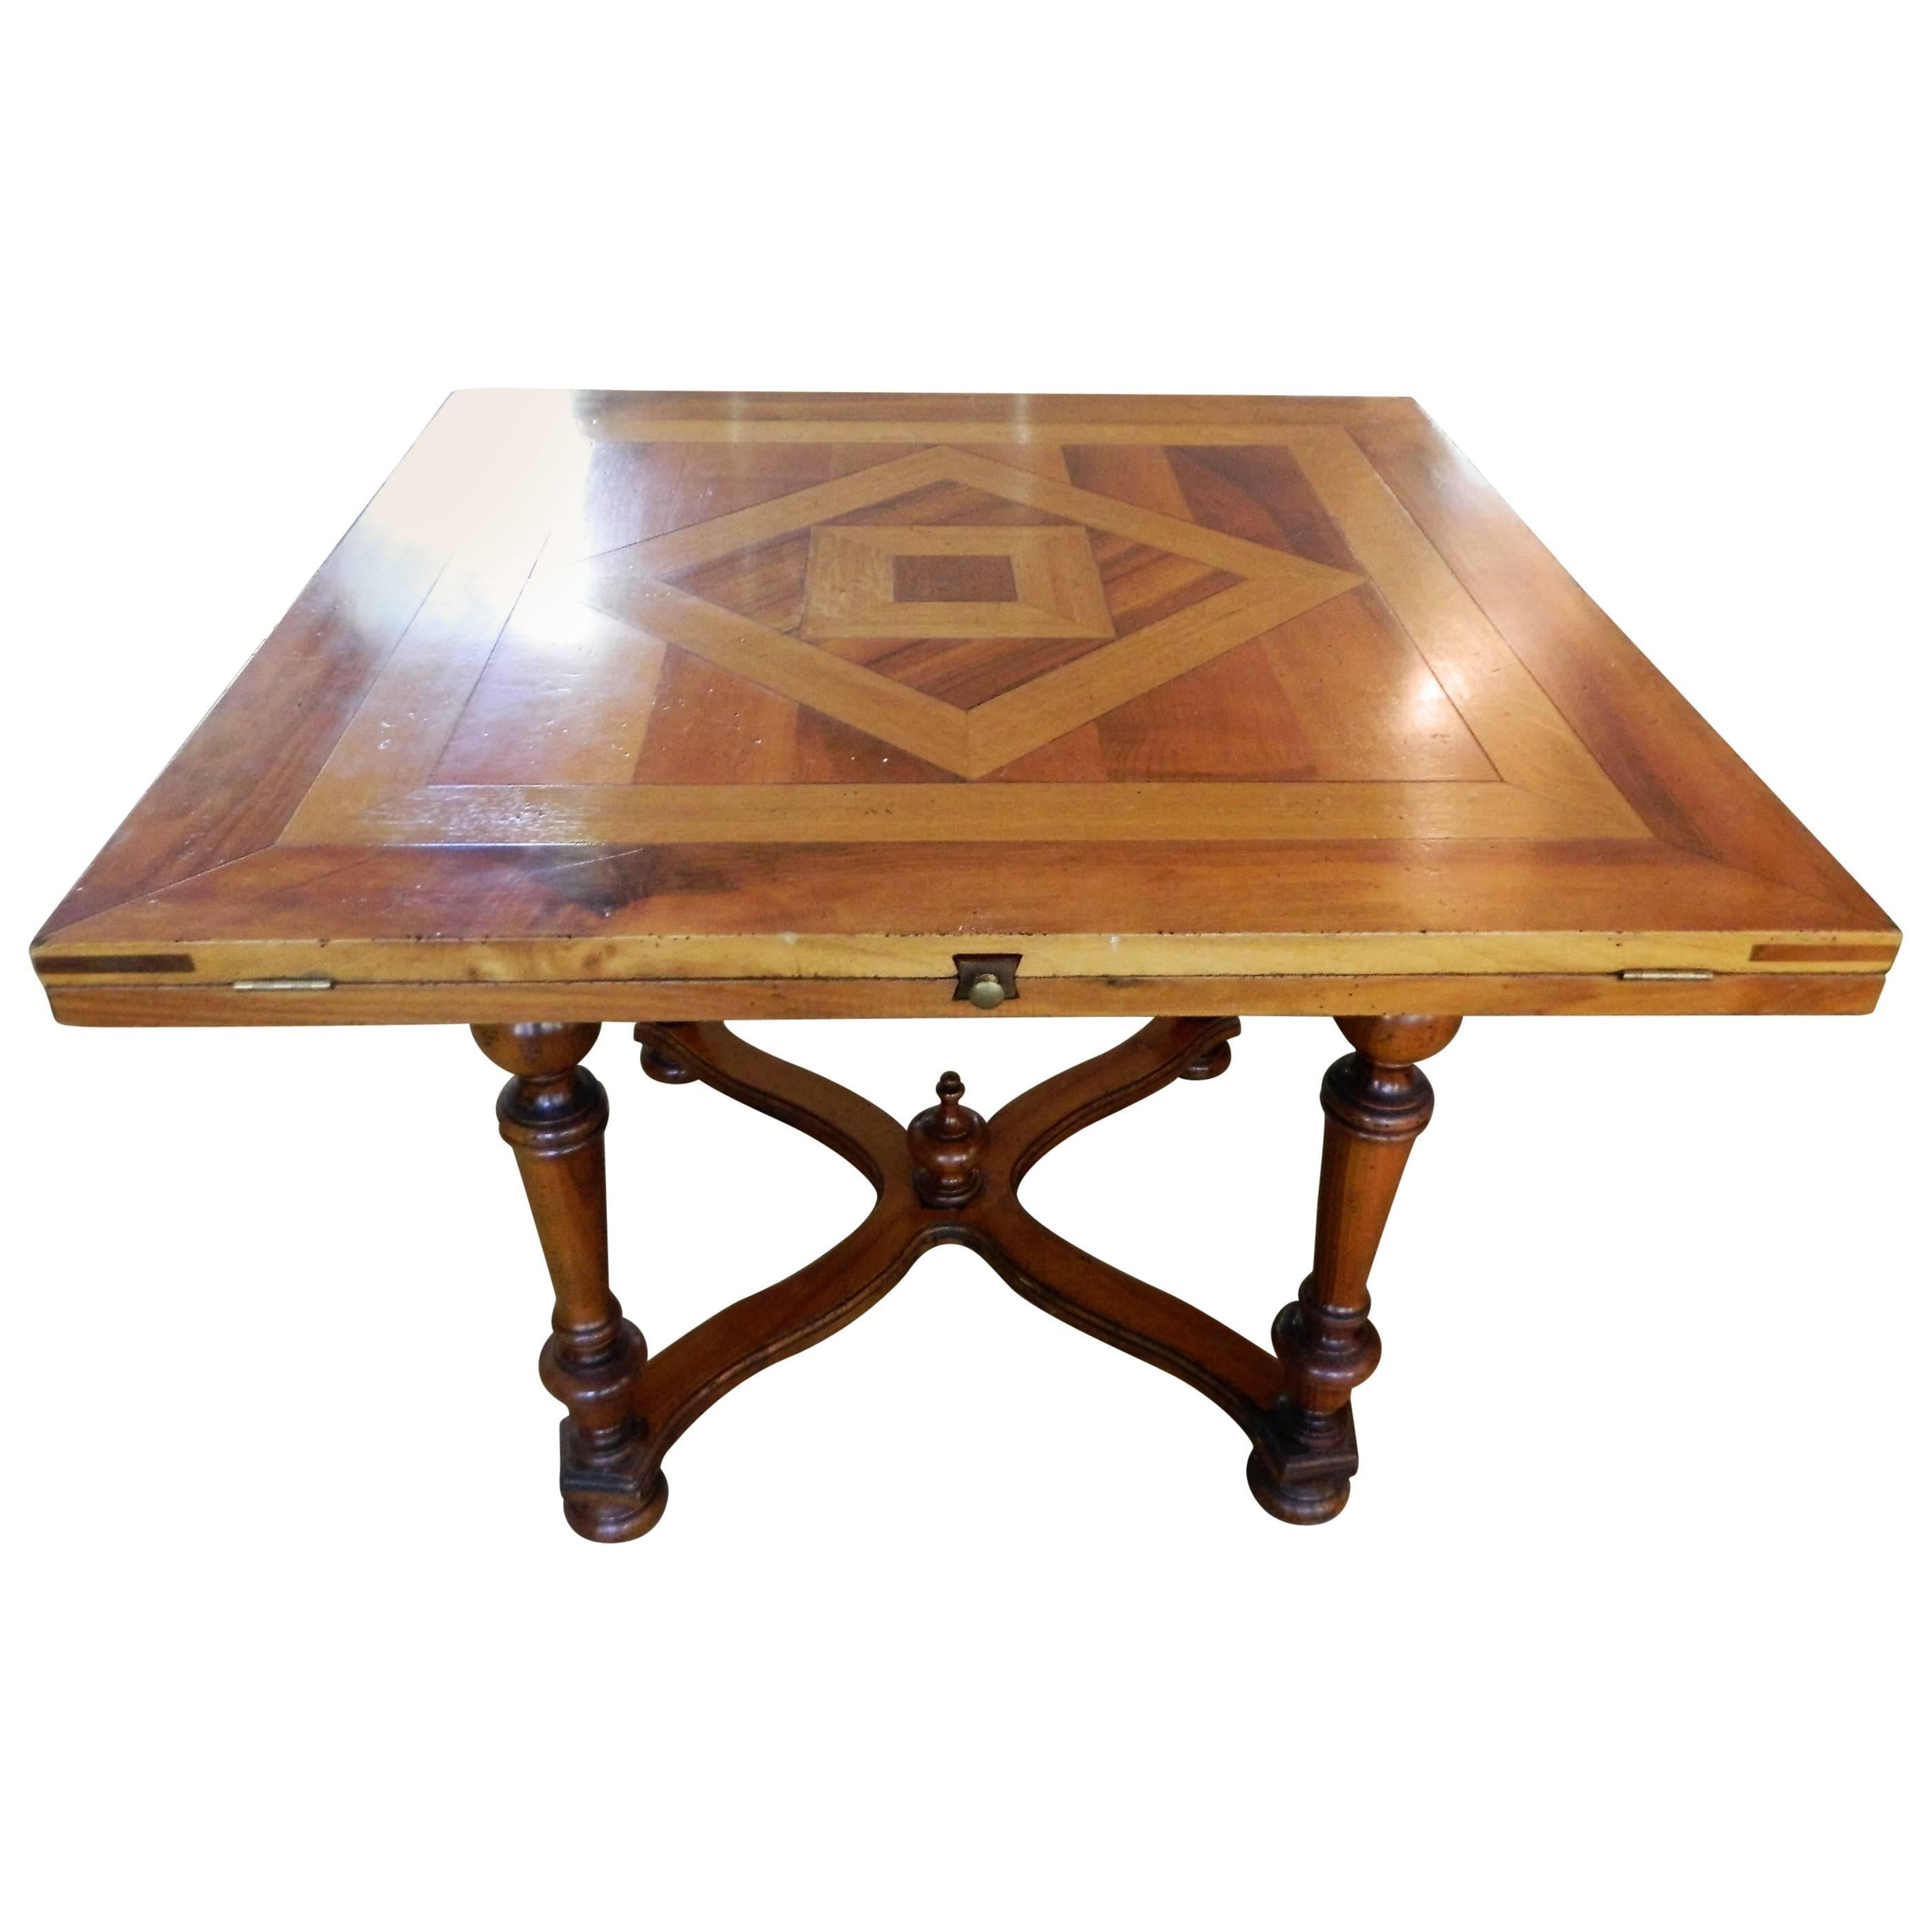 Custom-Made Square Marquetry Dining Table with Inlay Design, 20th Century